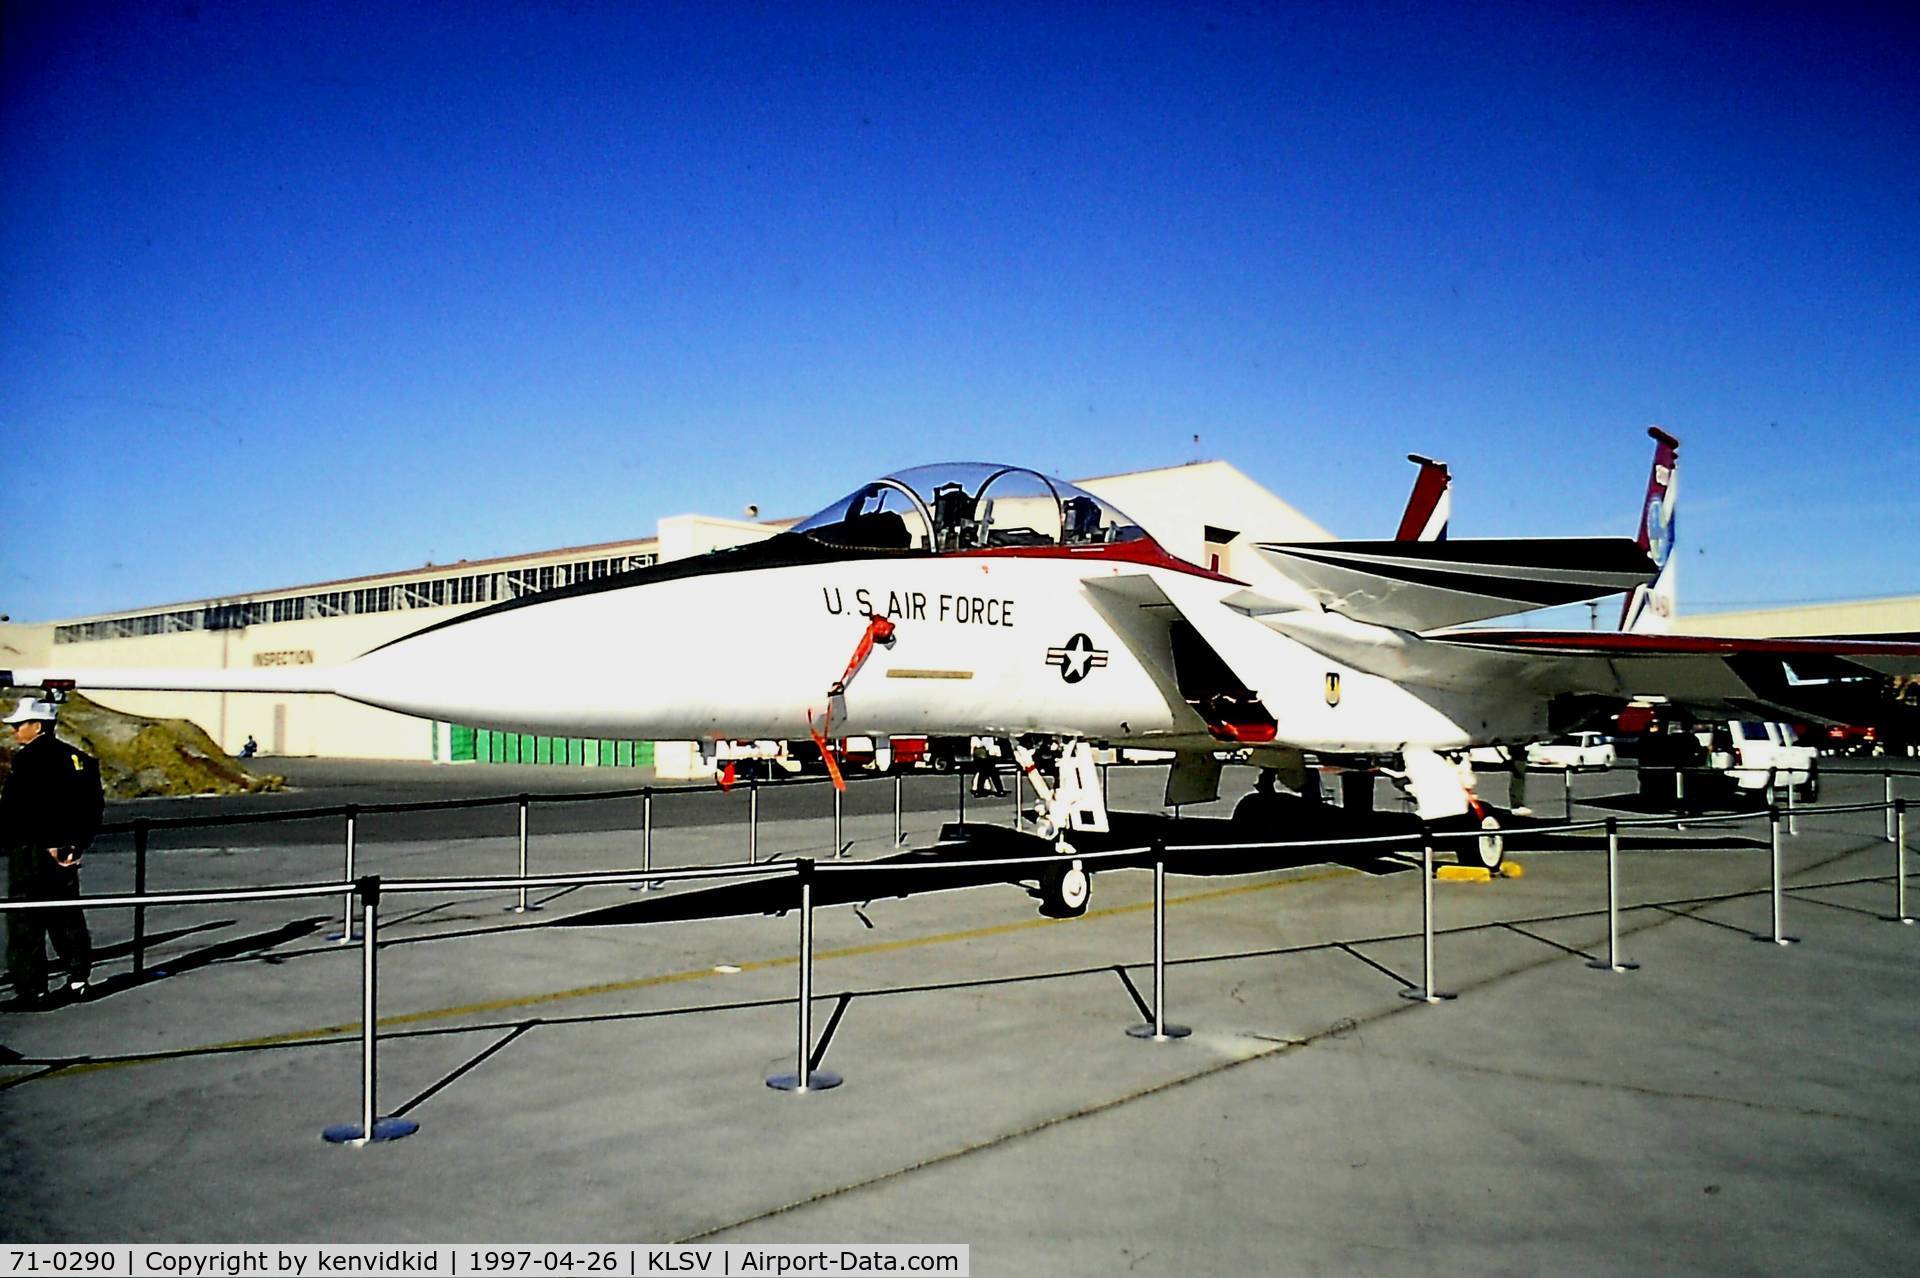 71-0290, 1971 McDonnell Douglas TF-15A Eagle C/N 8/B001, At the 1997 Golden Air Tattoo, Nellis.
ACTIVE F-15.